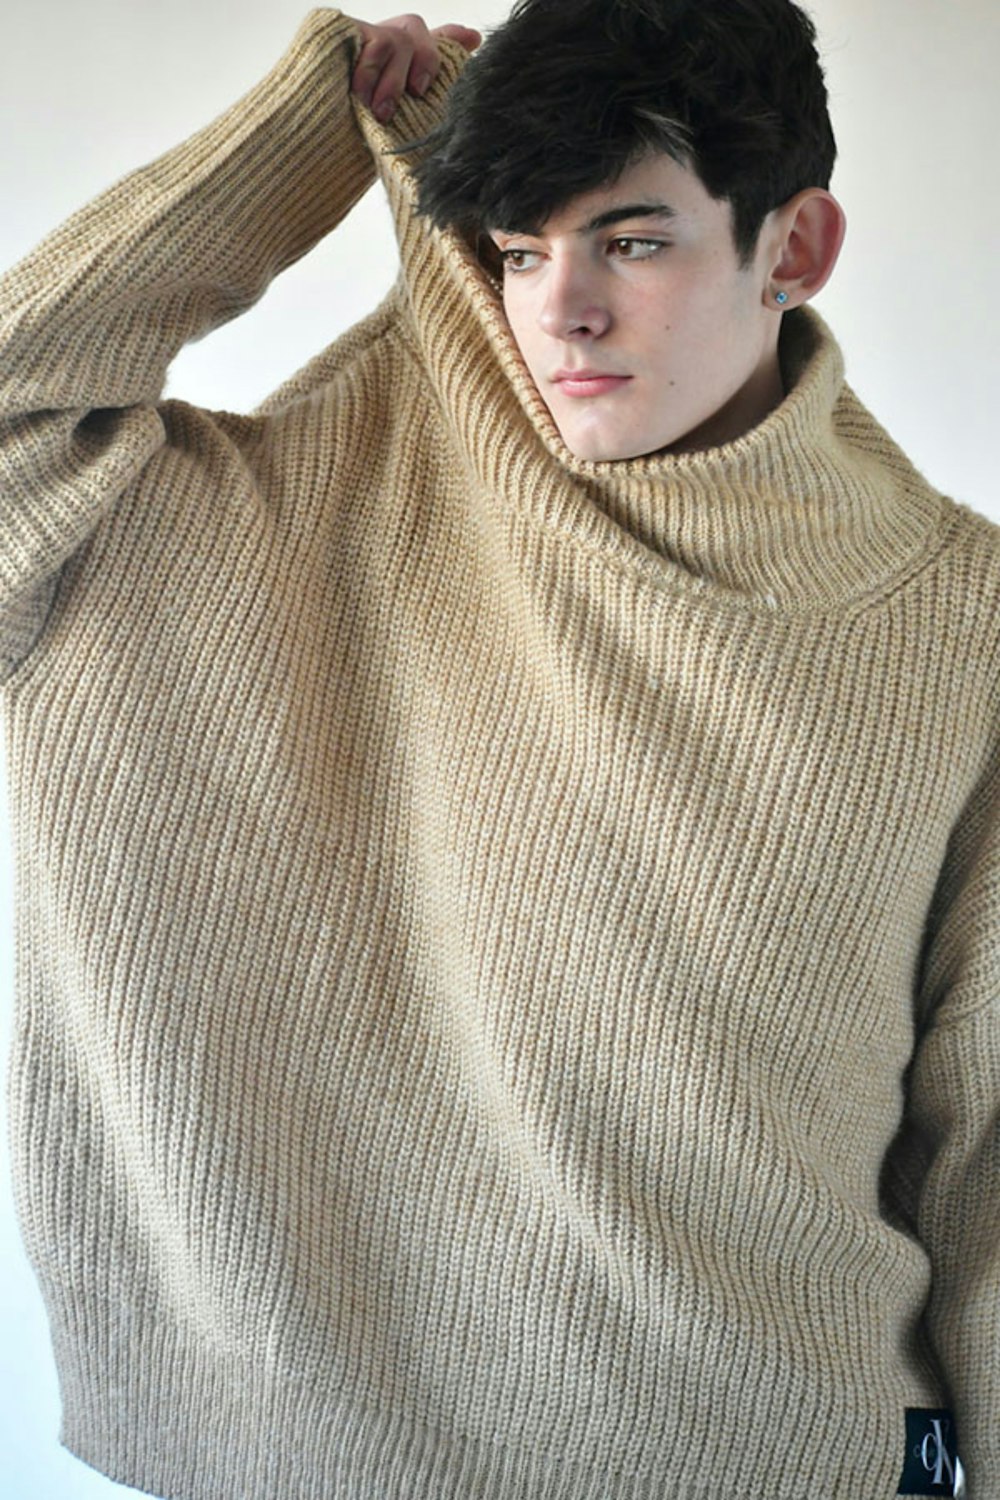 a young man wearing a turtle neck sweater